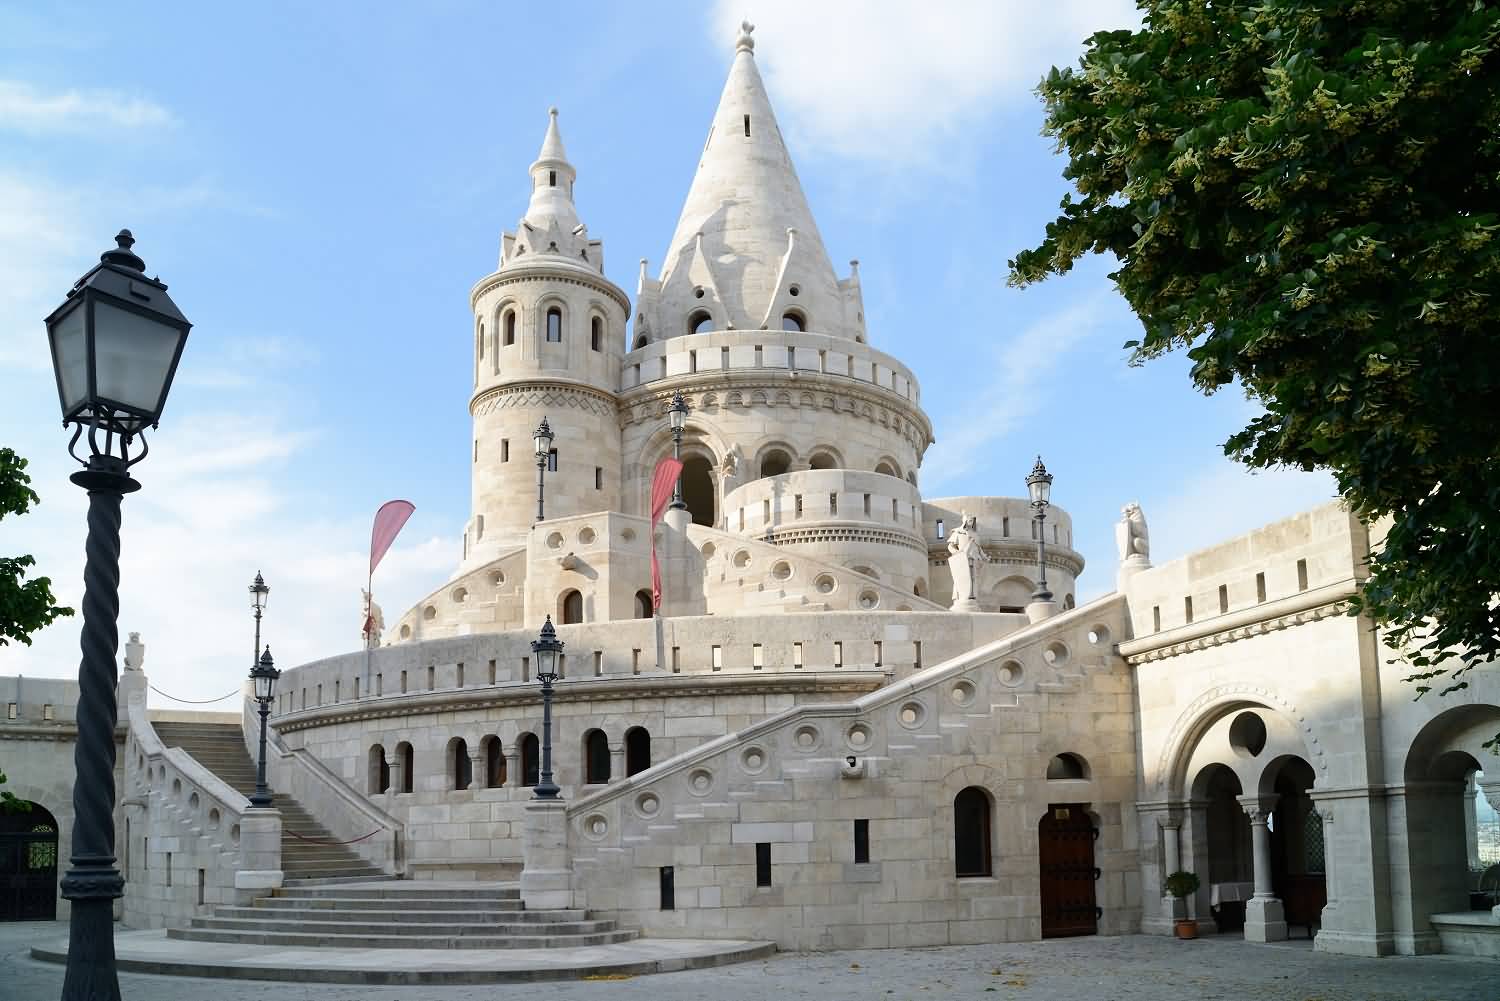 Beautiful Picture Of The Fisherman's Bastion In Budapest